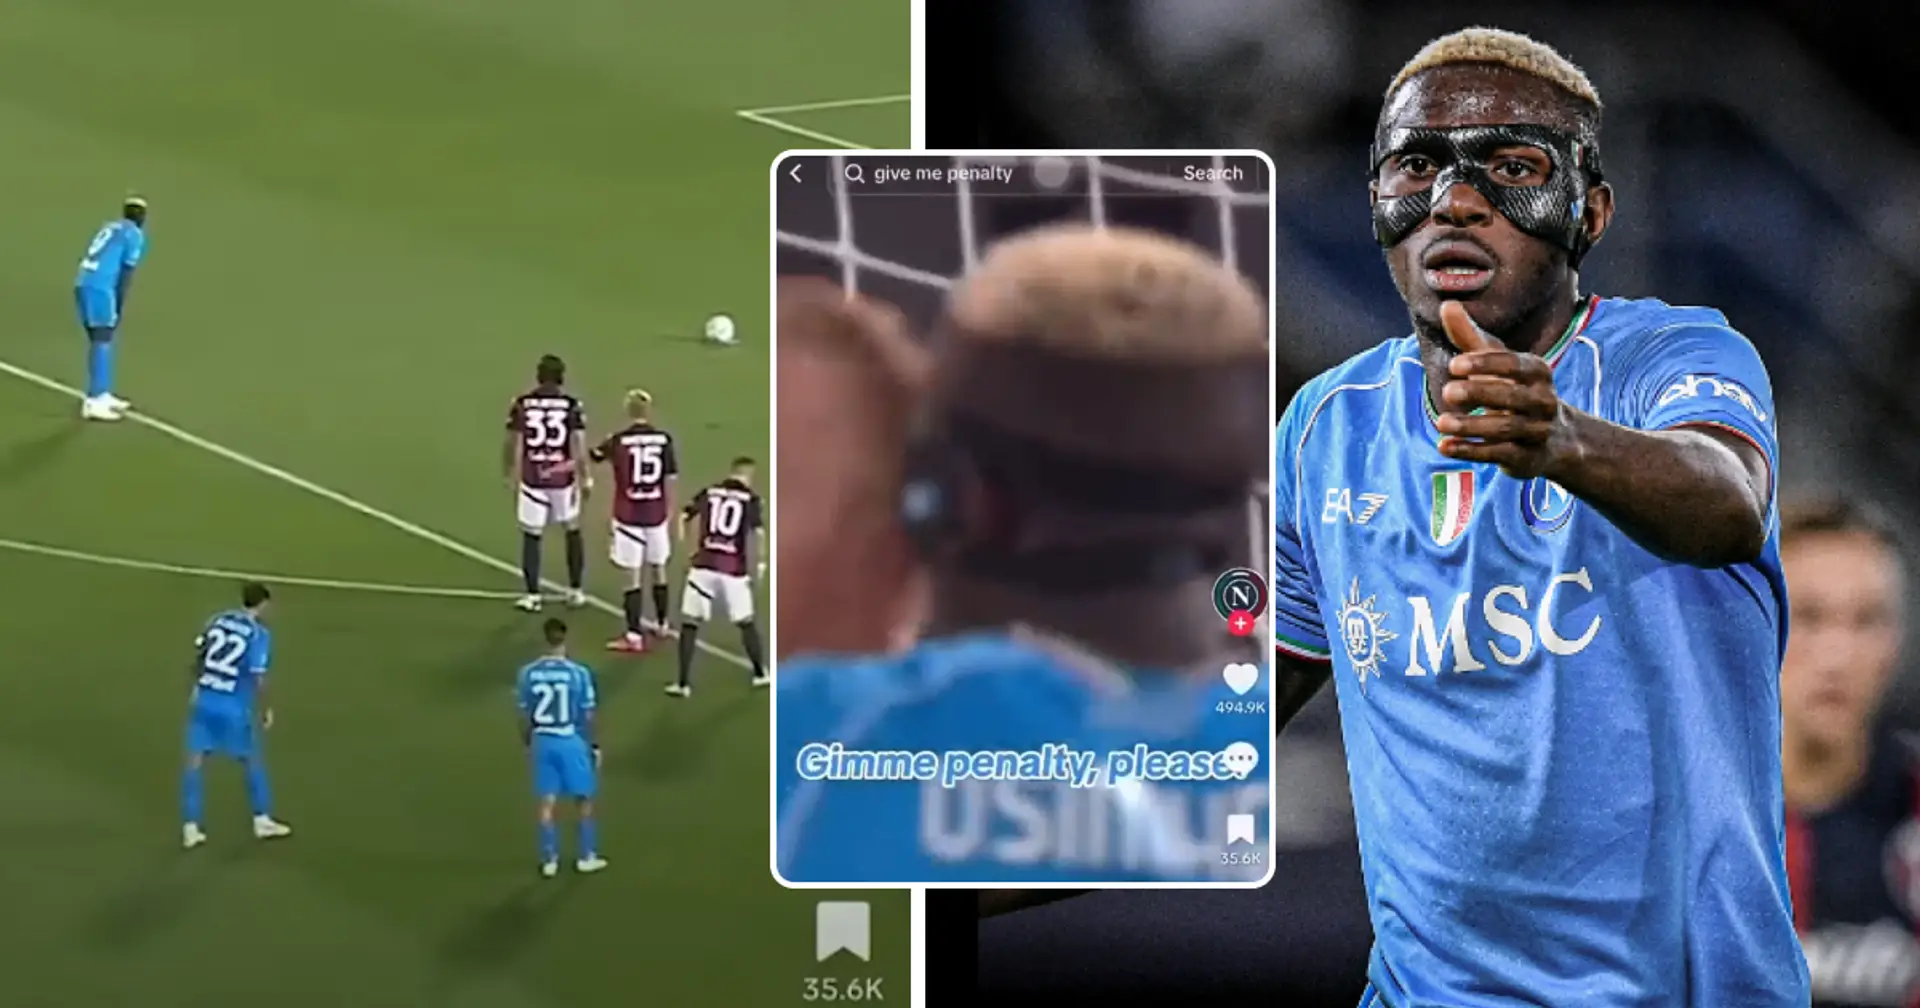 'We never wanted to mock Victor': Napoli release statement over TikTok video with Osimhen